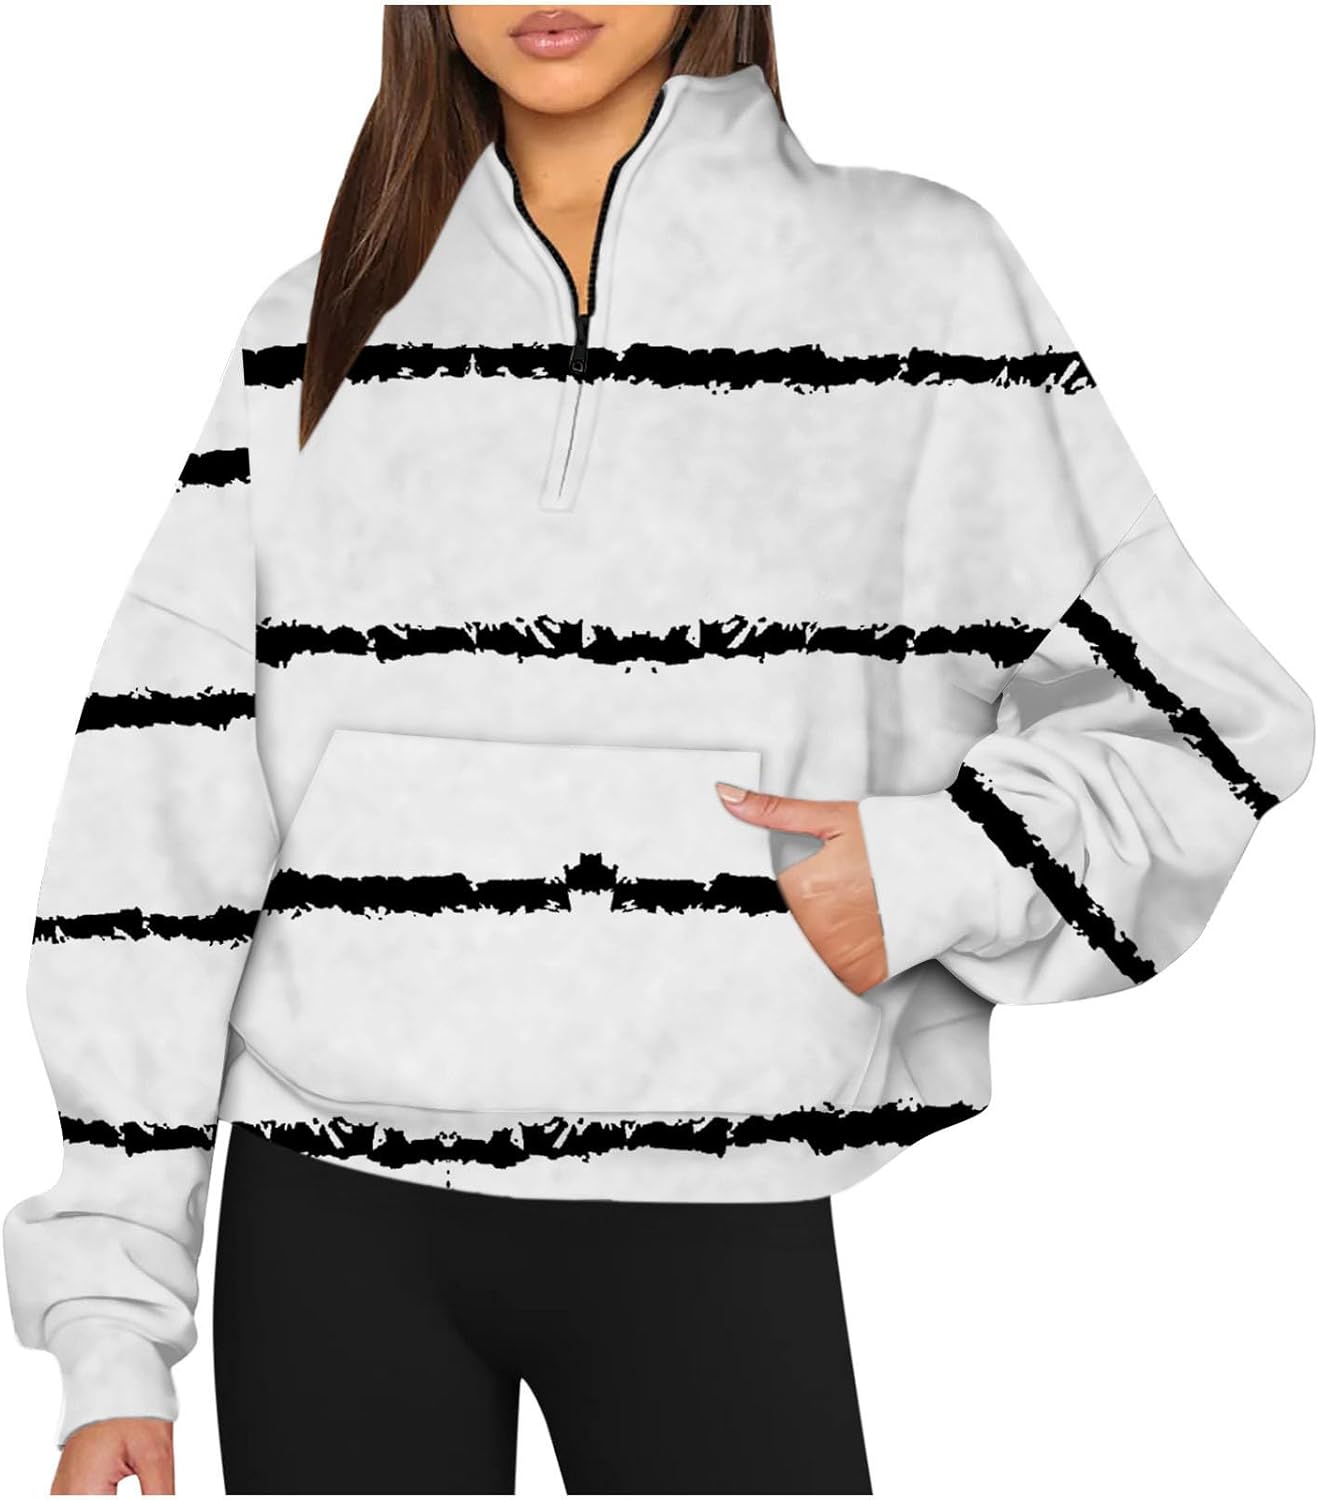 Womens Quarter Zip Up Hoodies Pullover for Fall Striped Sweatshirts Dressy Casual Long Sleeve Tops with Pocket